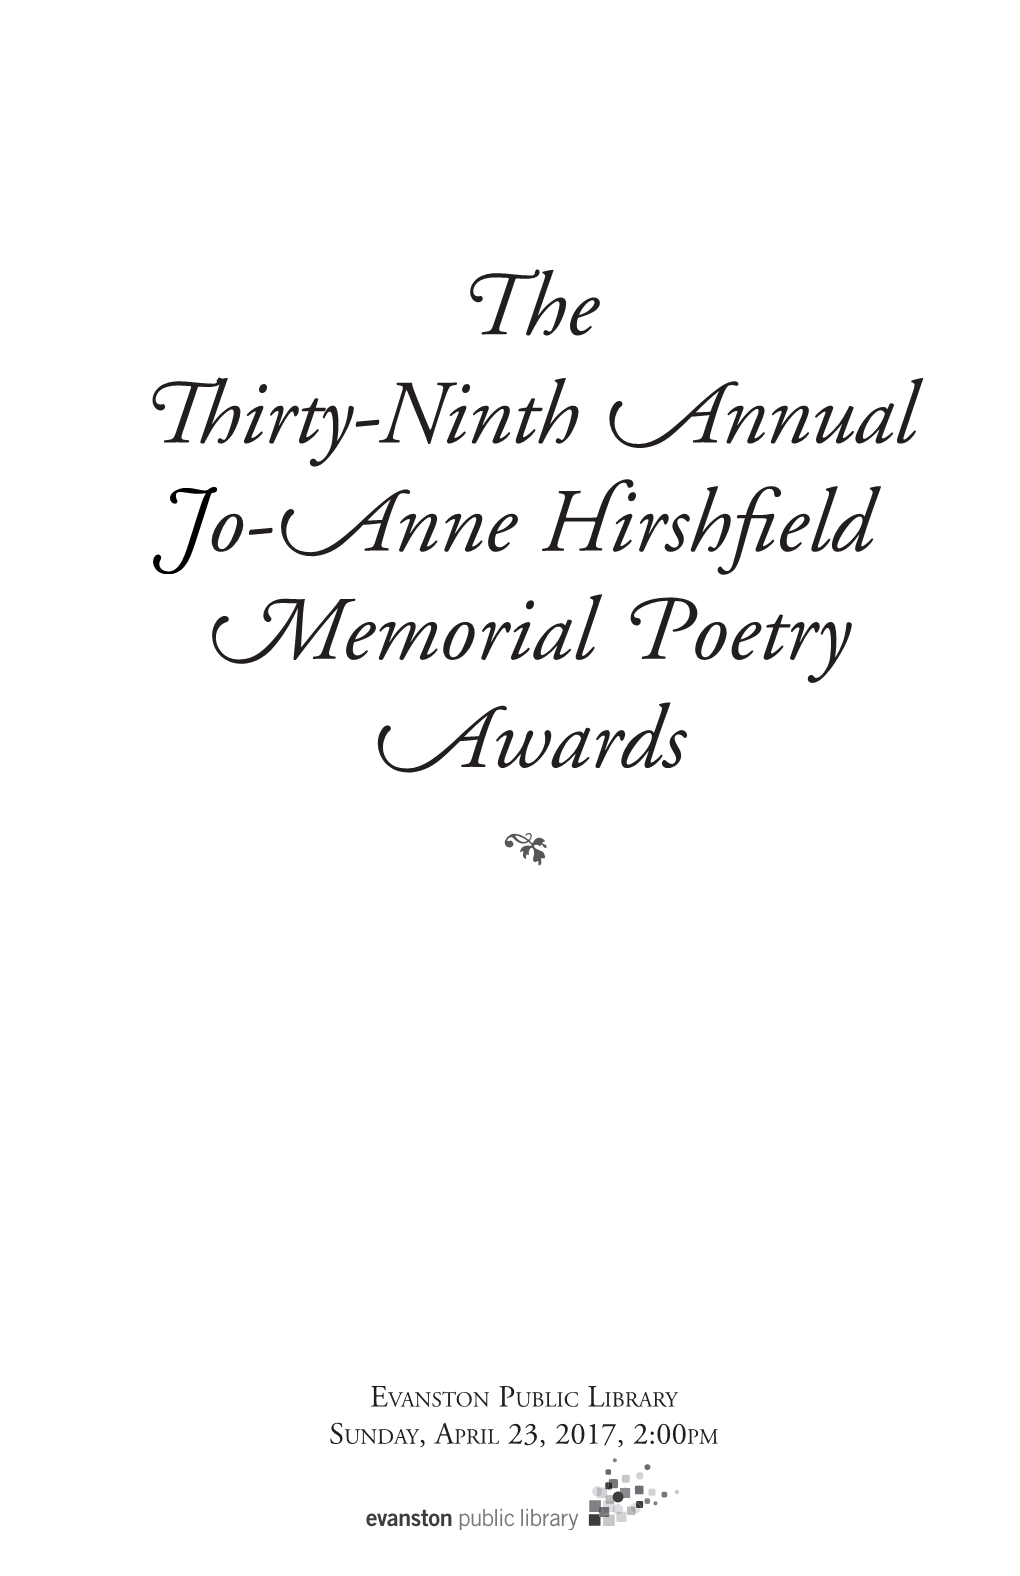 The Winners of the 2017 Jo-Anne Hirshfield Memorial Poetry Awards